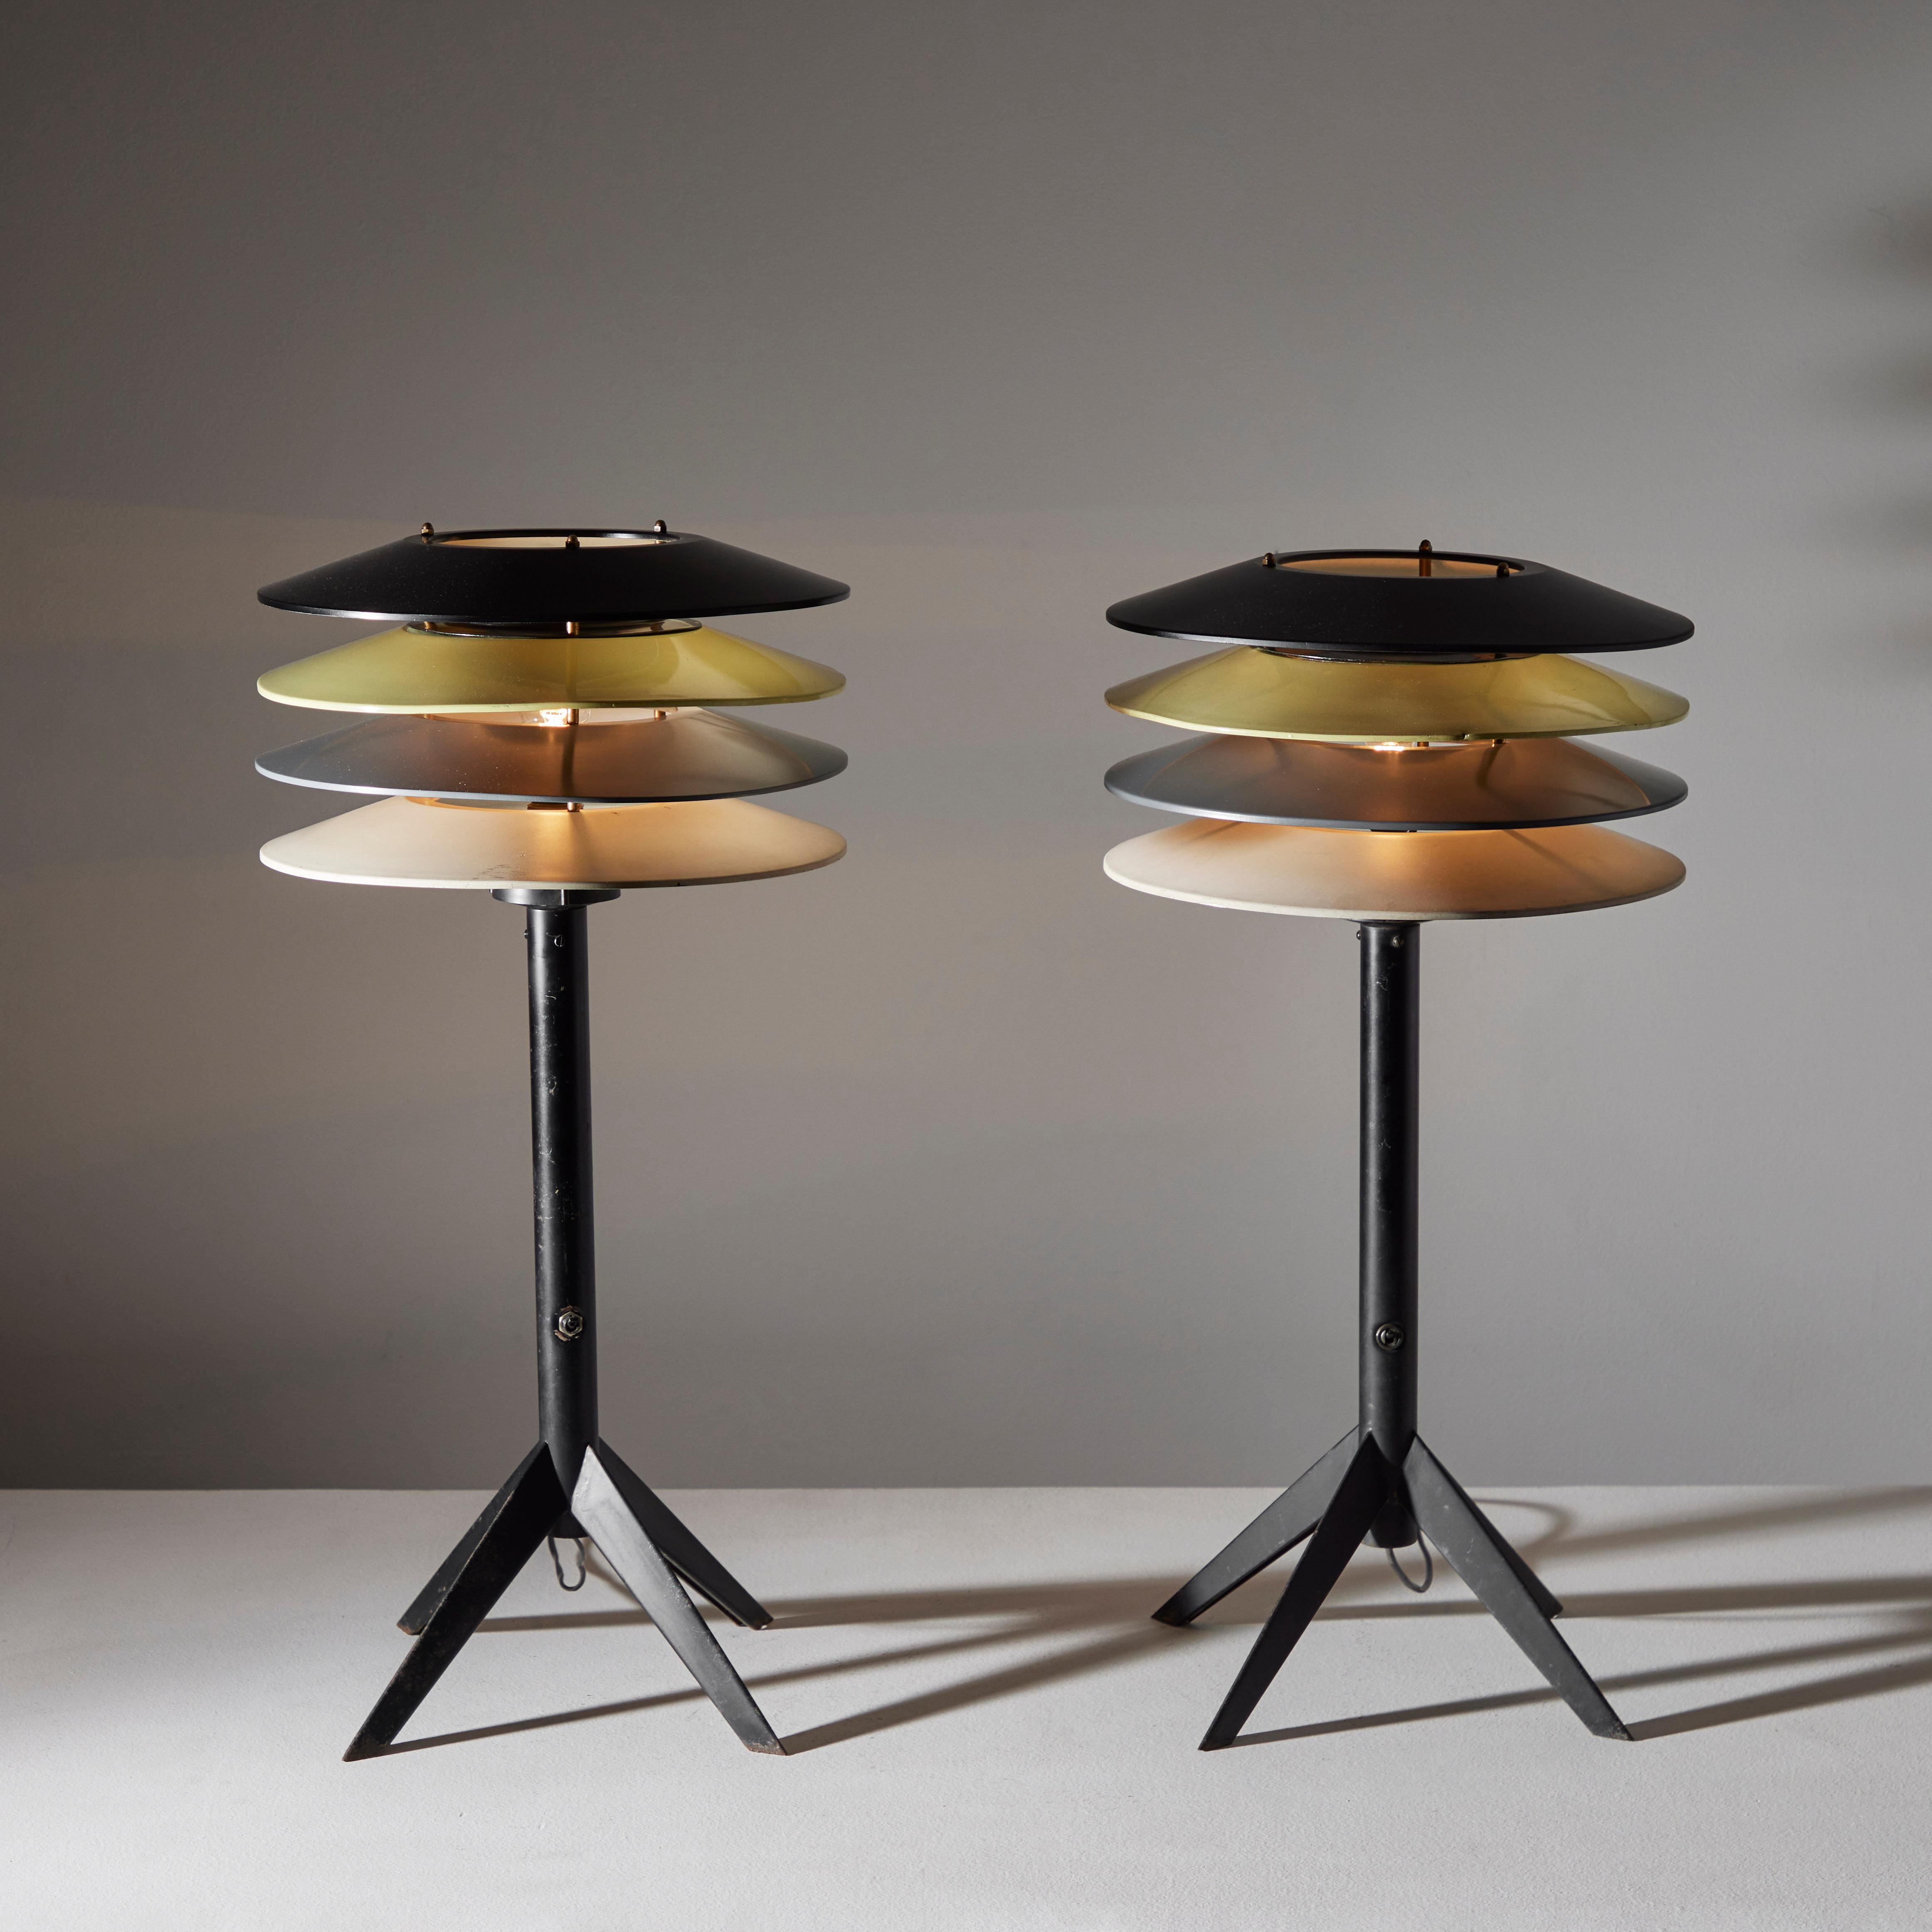 Rare Pair of table lamps by Stilnovo. Designed and manufactured in Milan Italy, circa 1960's. Enameled metal, brass. Original EU cord. We recommend Lamping: 120v 1 Qty E27 Socket 60w Clear Bulb. Lightbulbs not included. Stilnovo Sticker on shade.